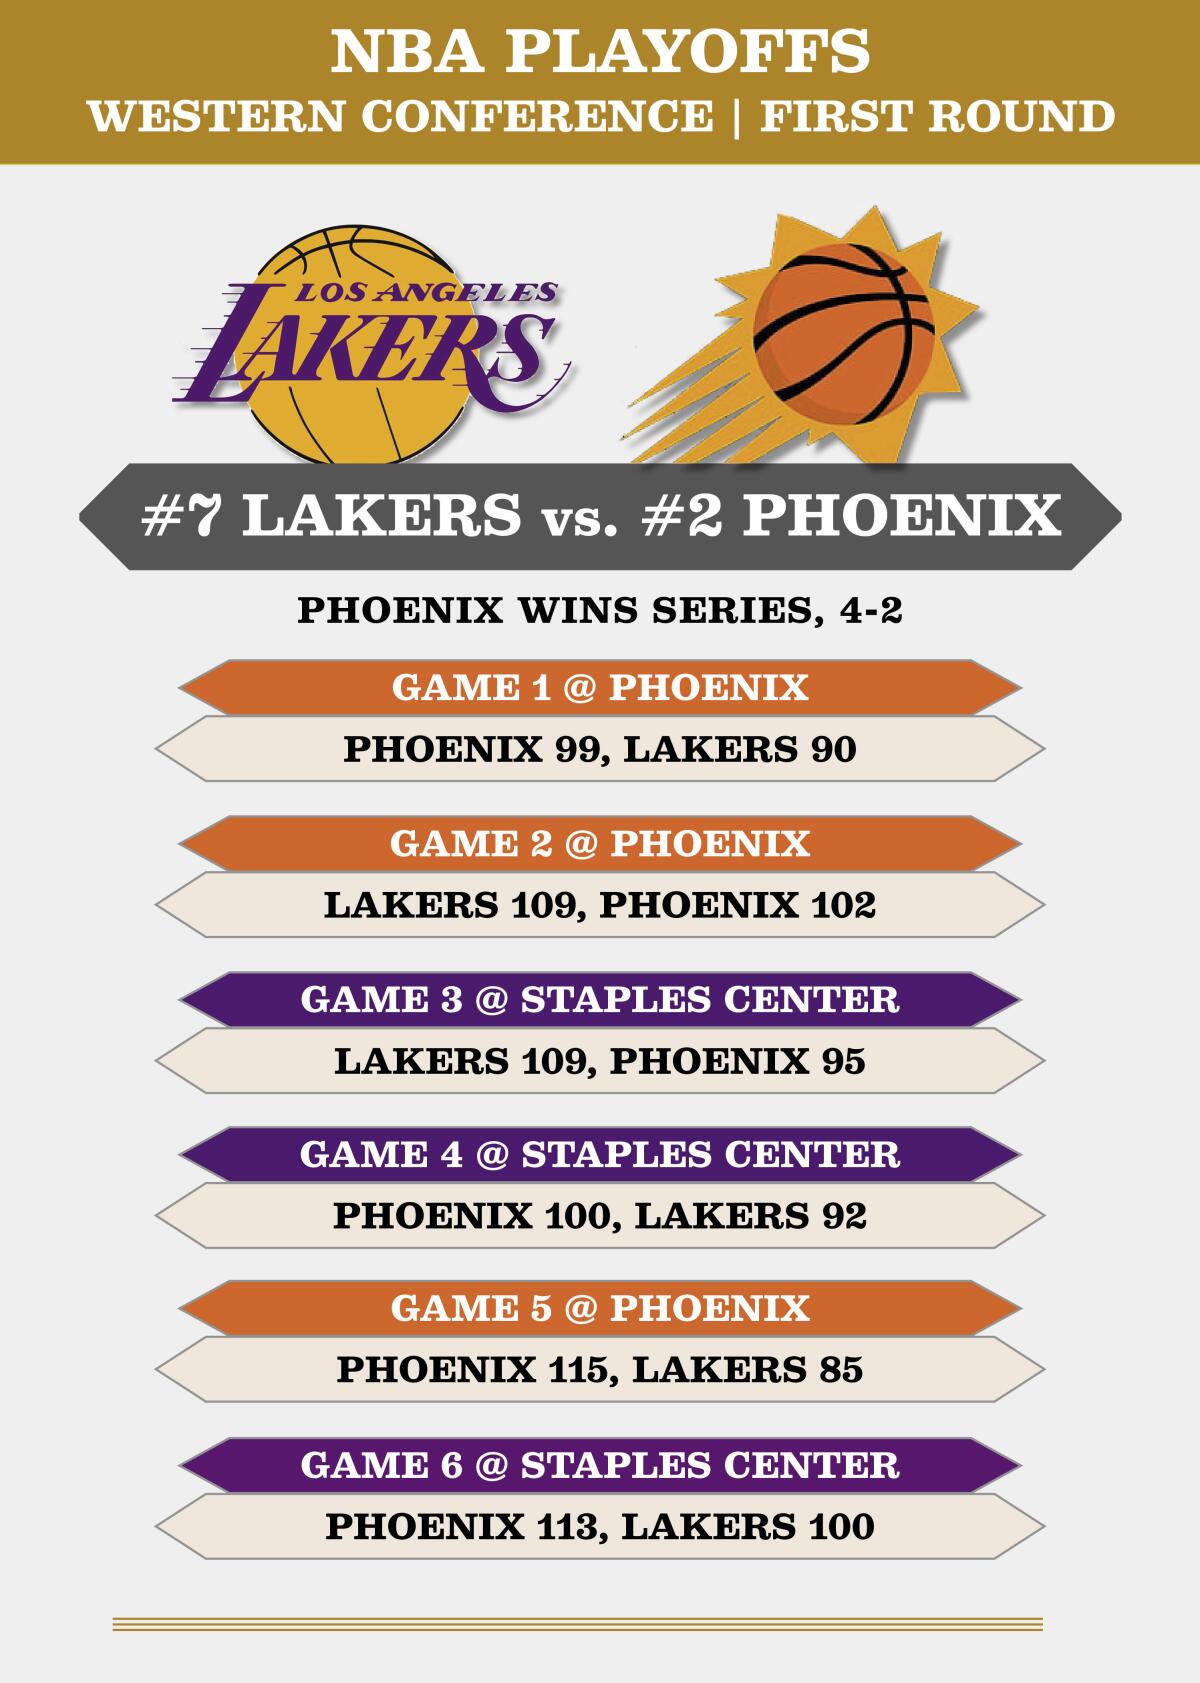 Lakers-Suns schedule for first-round playoff series.